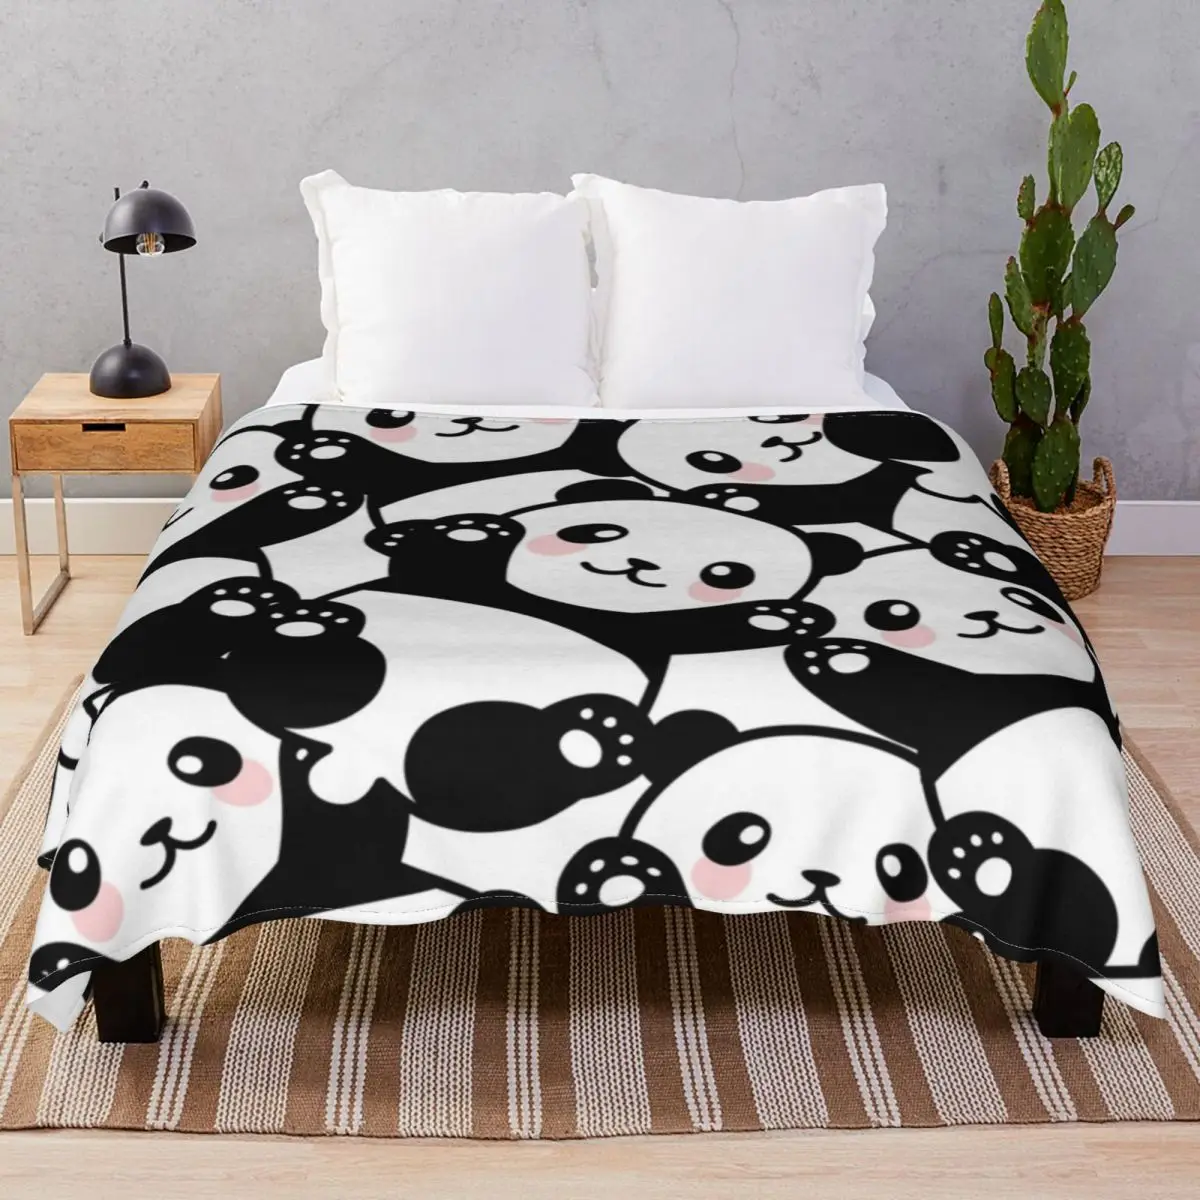 Pandas Blanket Flannel All Season Lightweight Thin Throw Blankets for Bed Sofa Camp Office